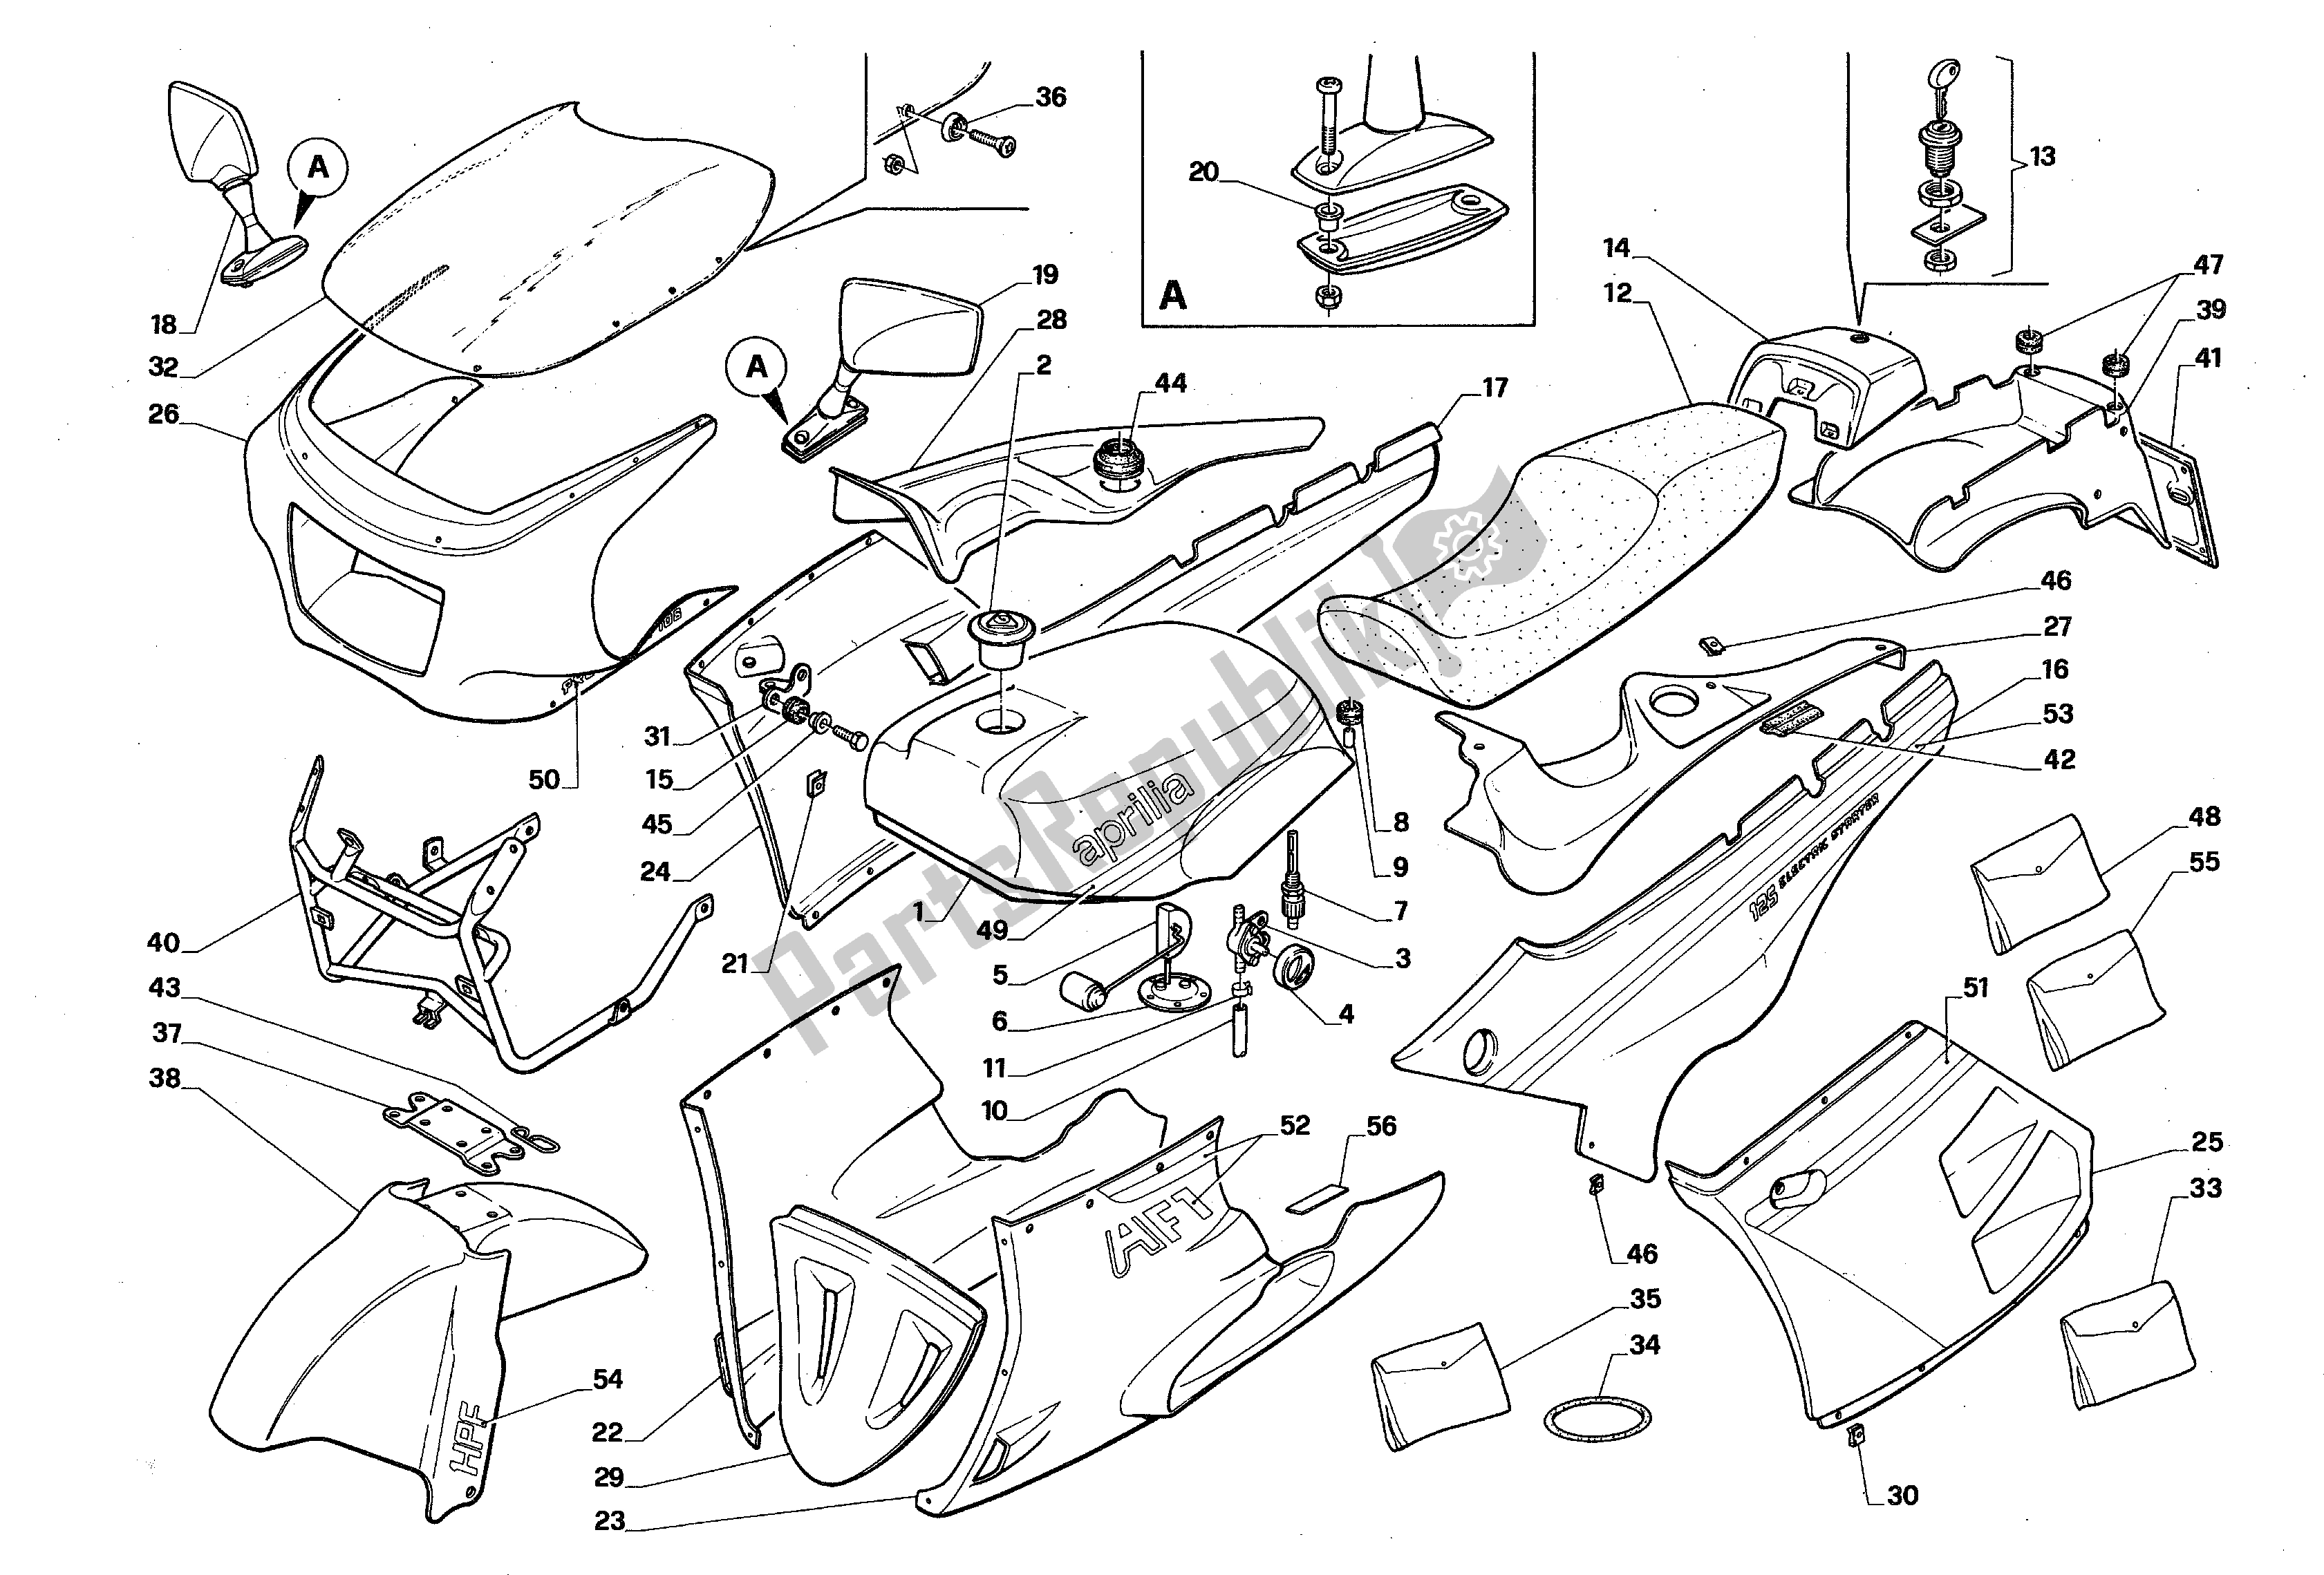 All parts for the Body of the Aprilia AF1 125 1987